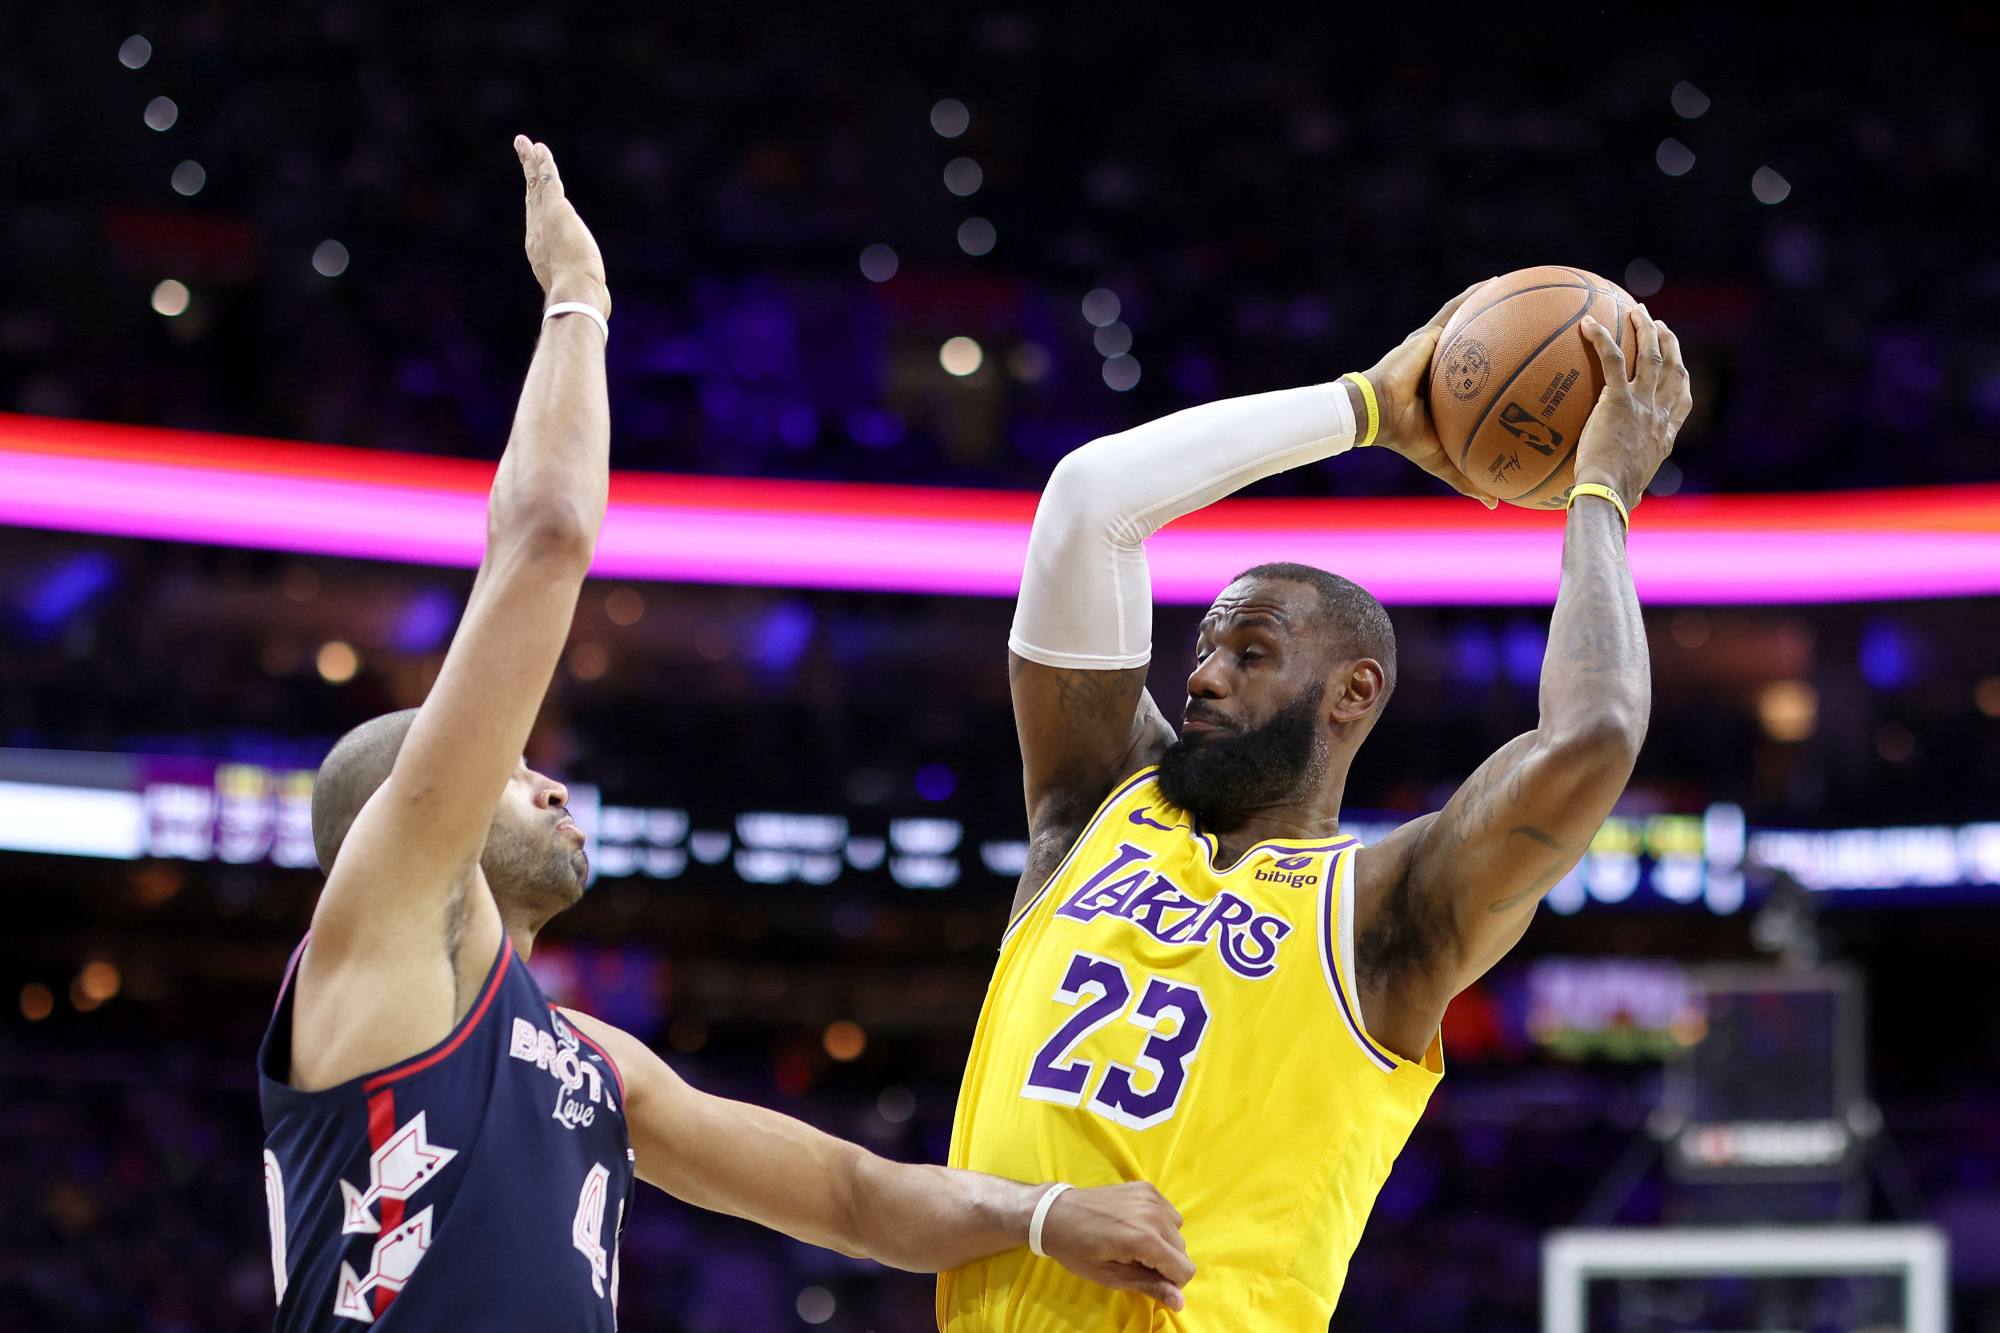 lebron james breaks nba minutes record held by lakers legend abdul-jabbar, but suffers worst defeat of his career